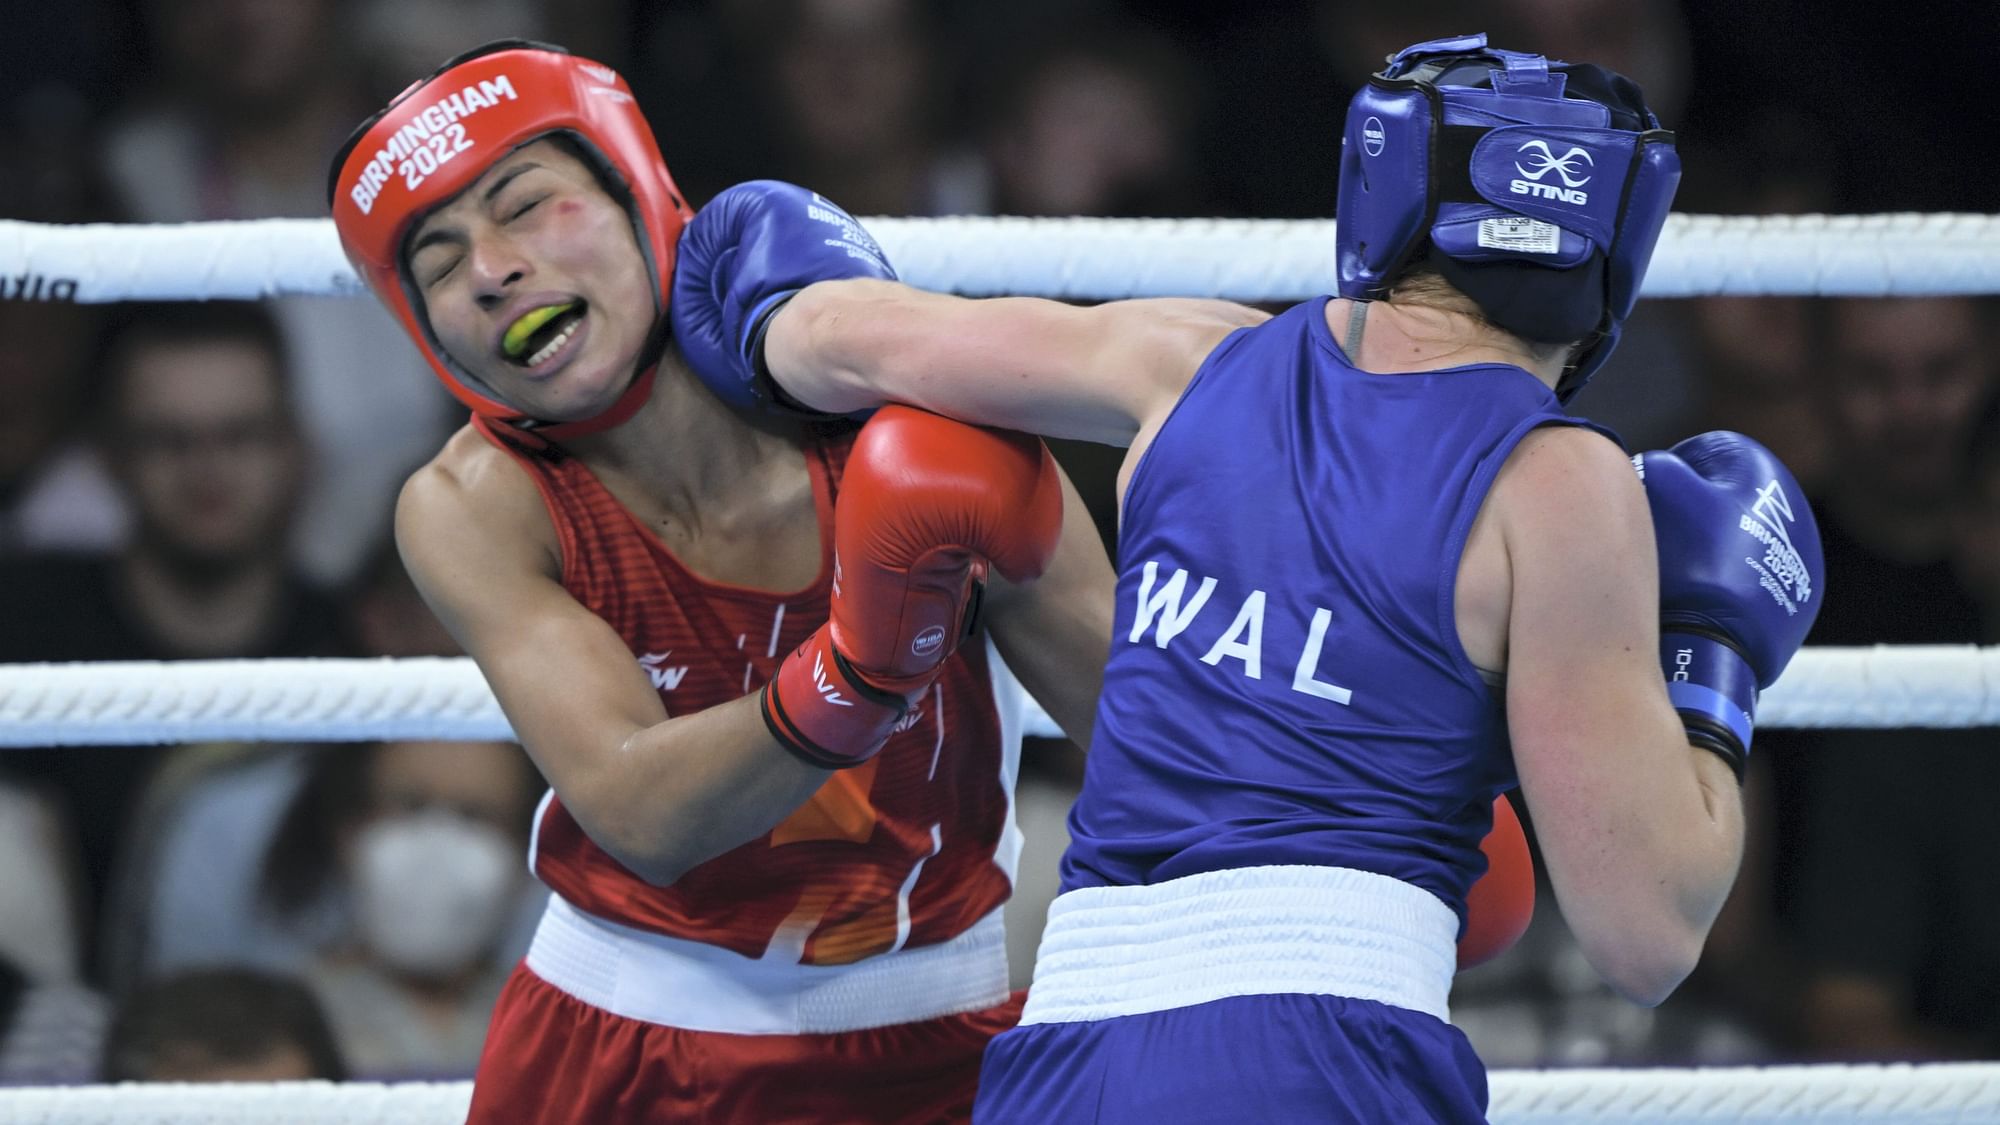 <div class="paragraphs"><p>Indian boxer Lovlina Borgohain crashed out of the women's light middleweight category after losing her quarter-final match at the 2022 Commonwealth Games in Birmingham.&nbsp;</p></div>